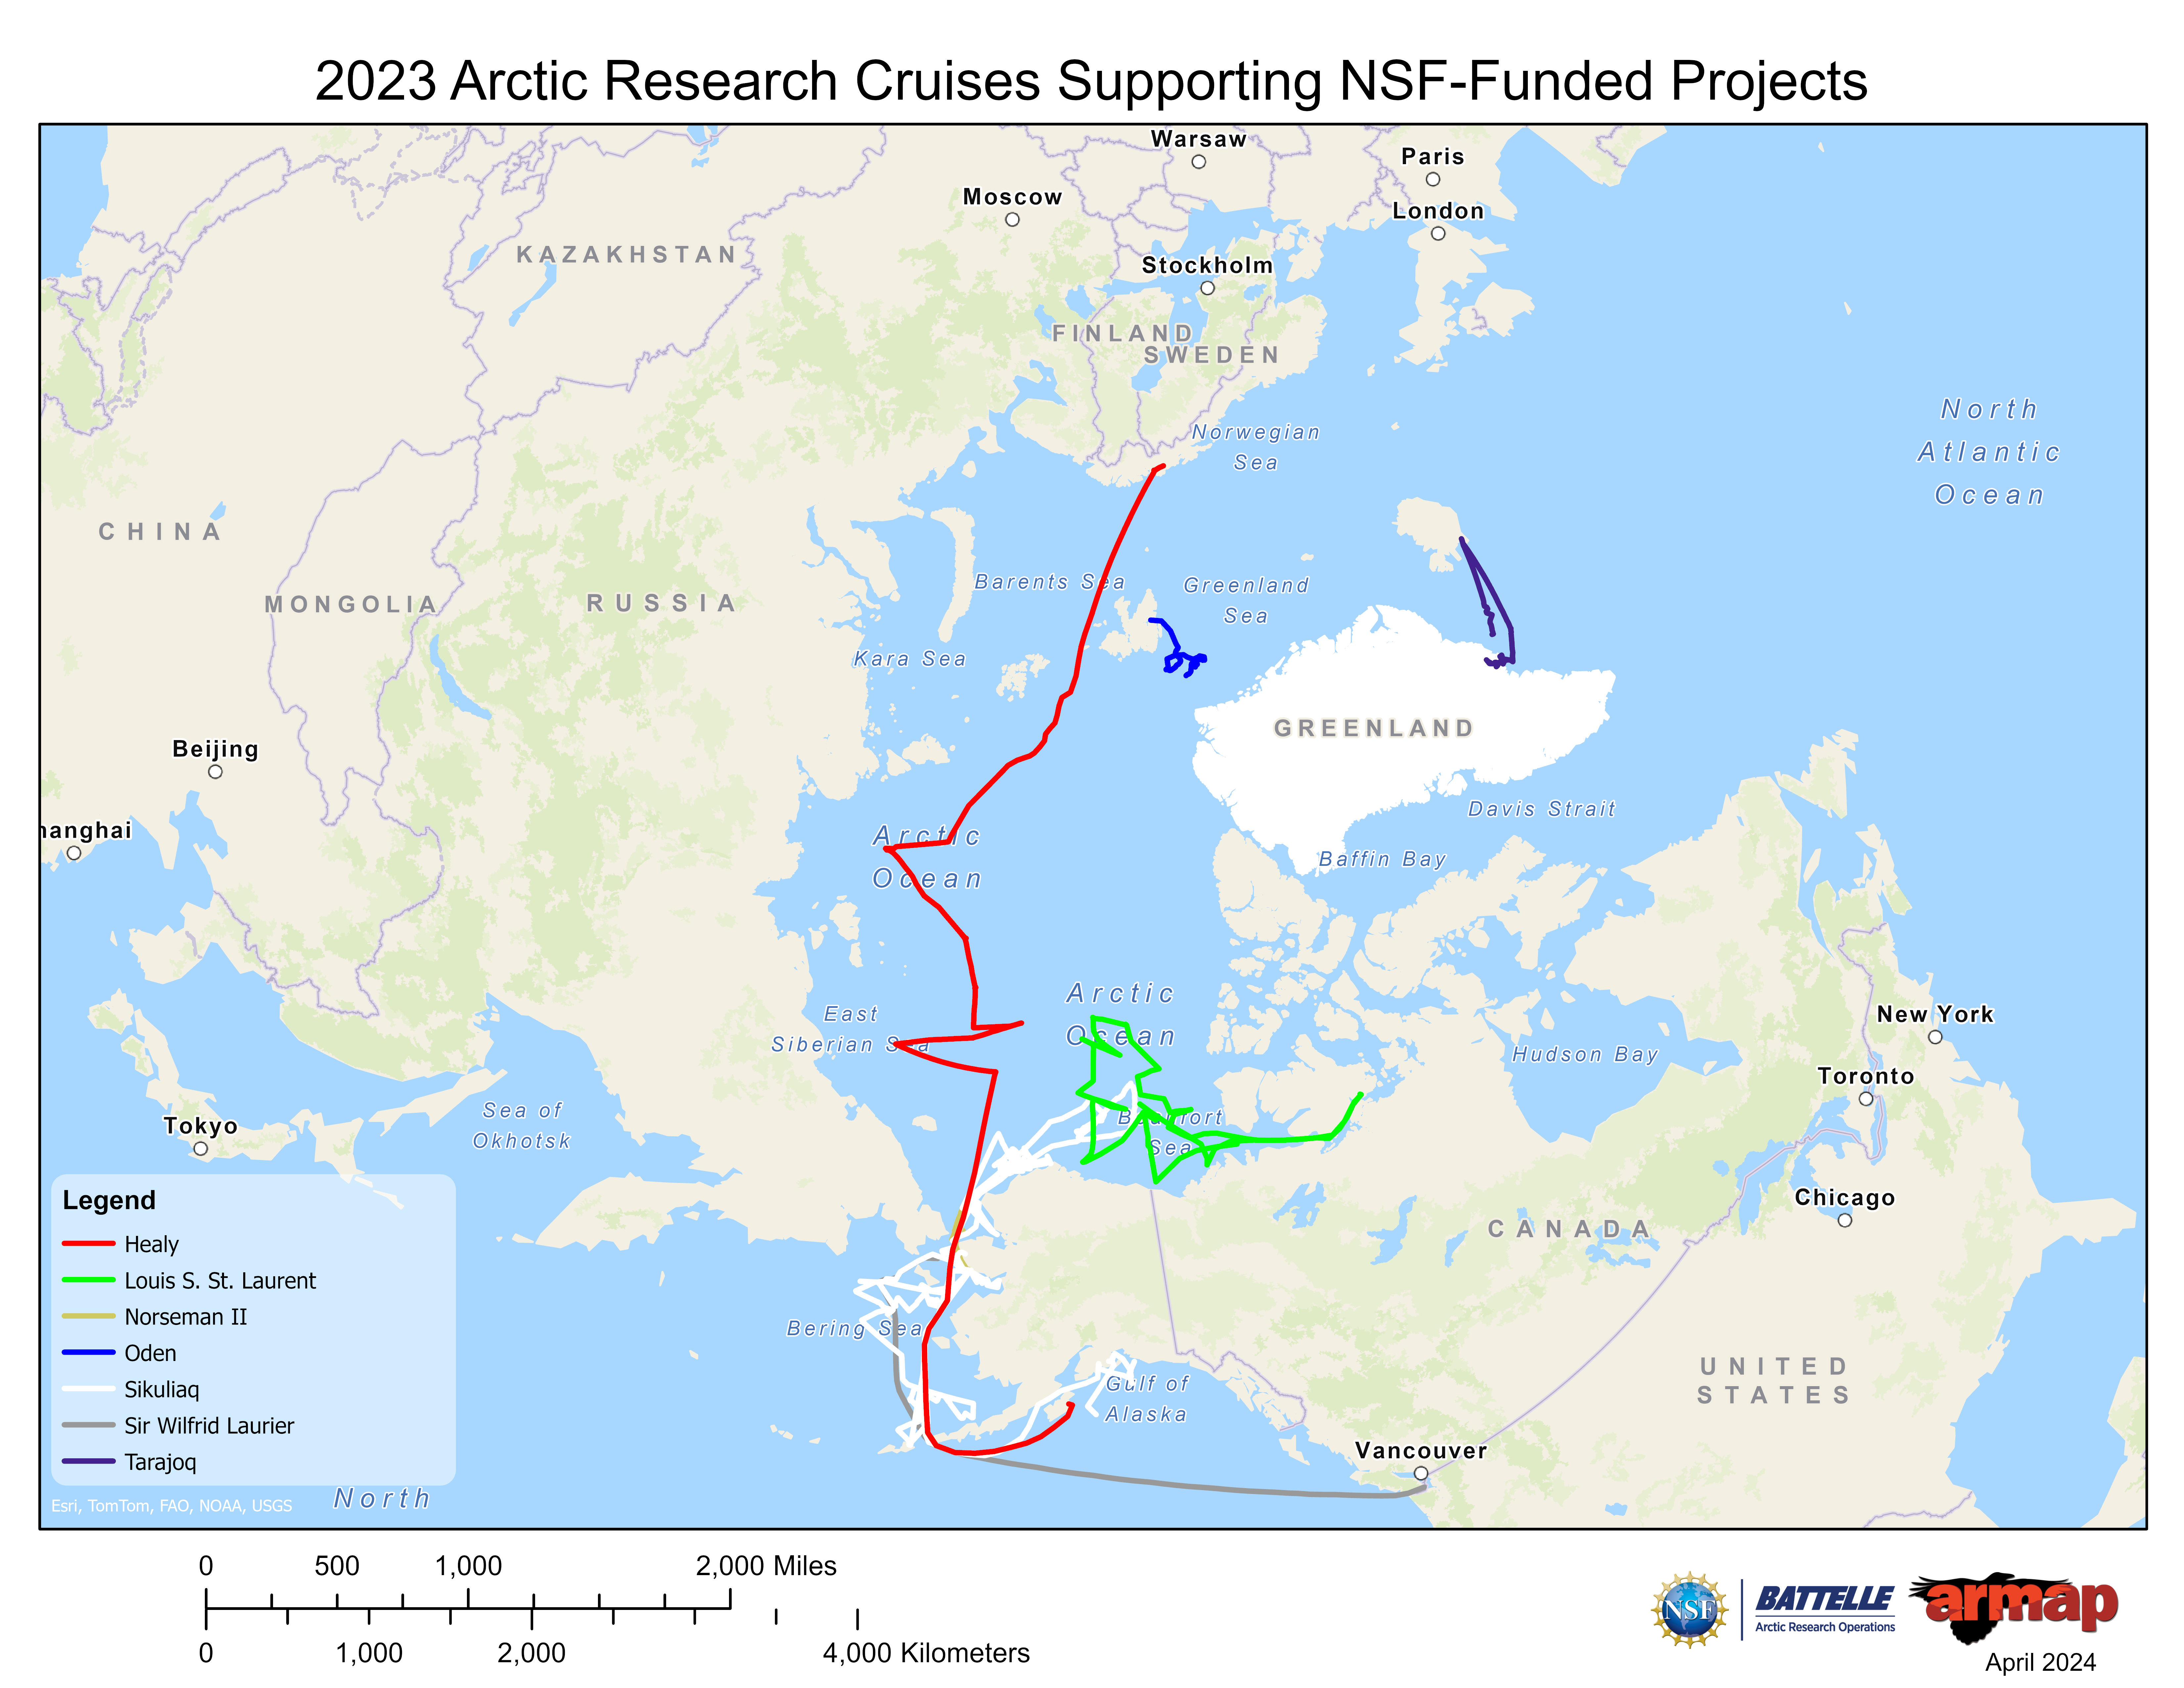 Arctic Research Cruises Supporting US-Funded Projects for the Past Year